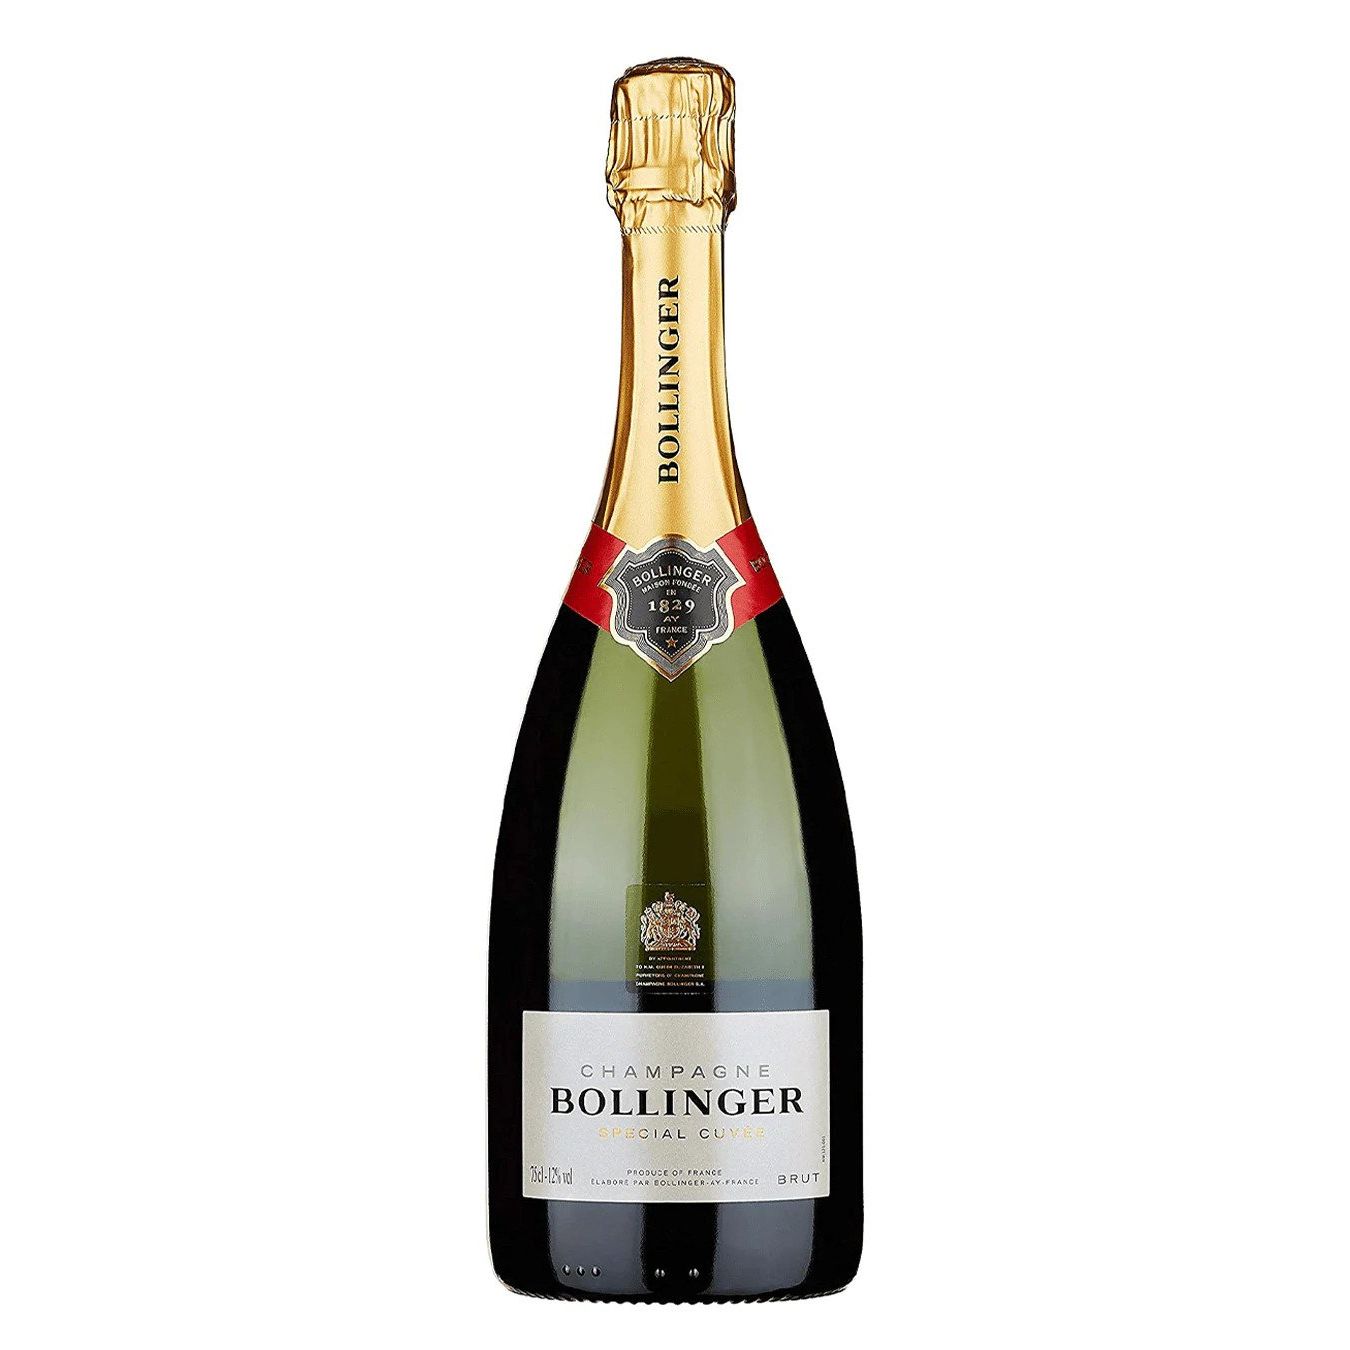 Picture of Bollinger champagne bottle